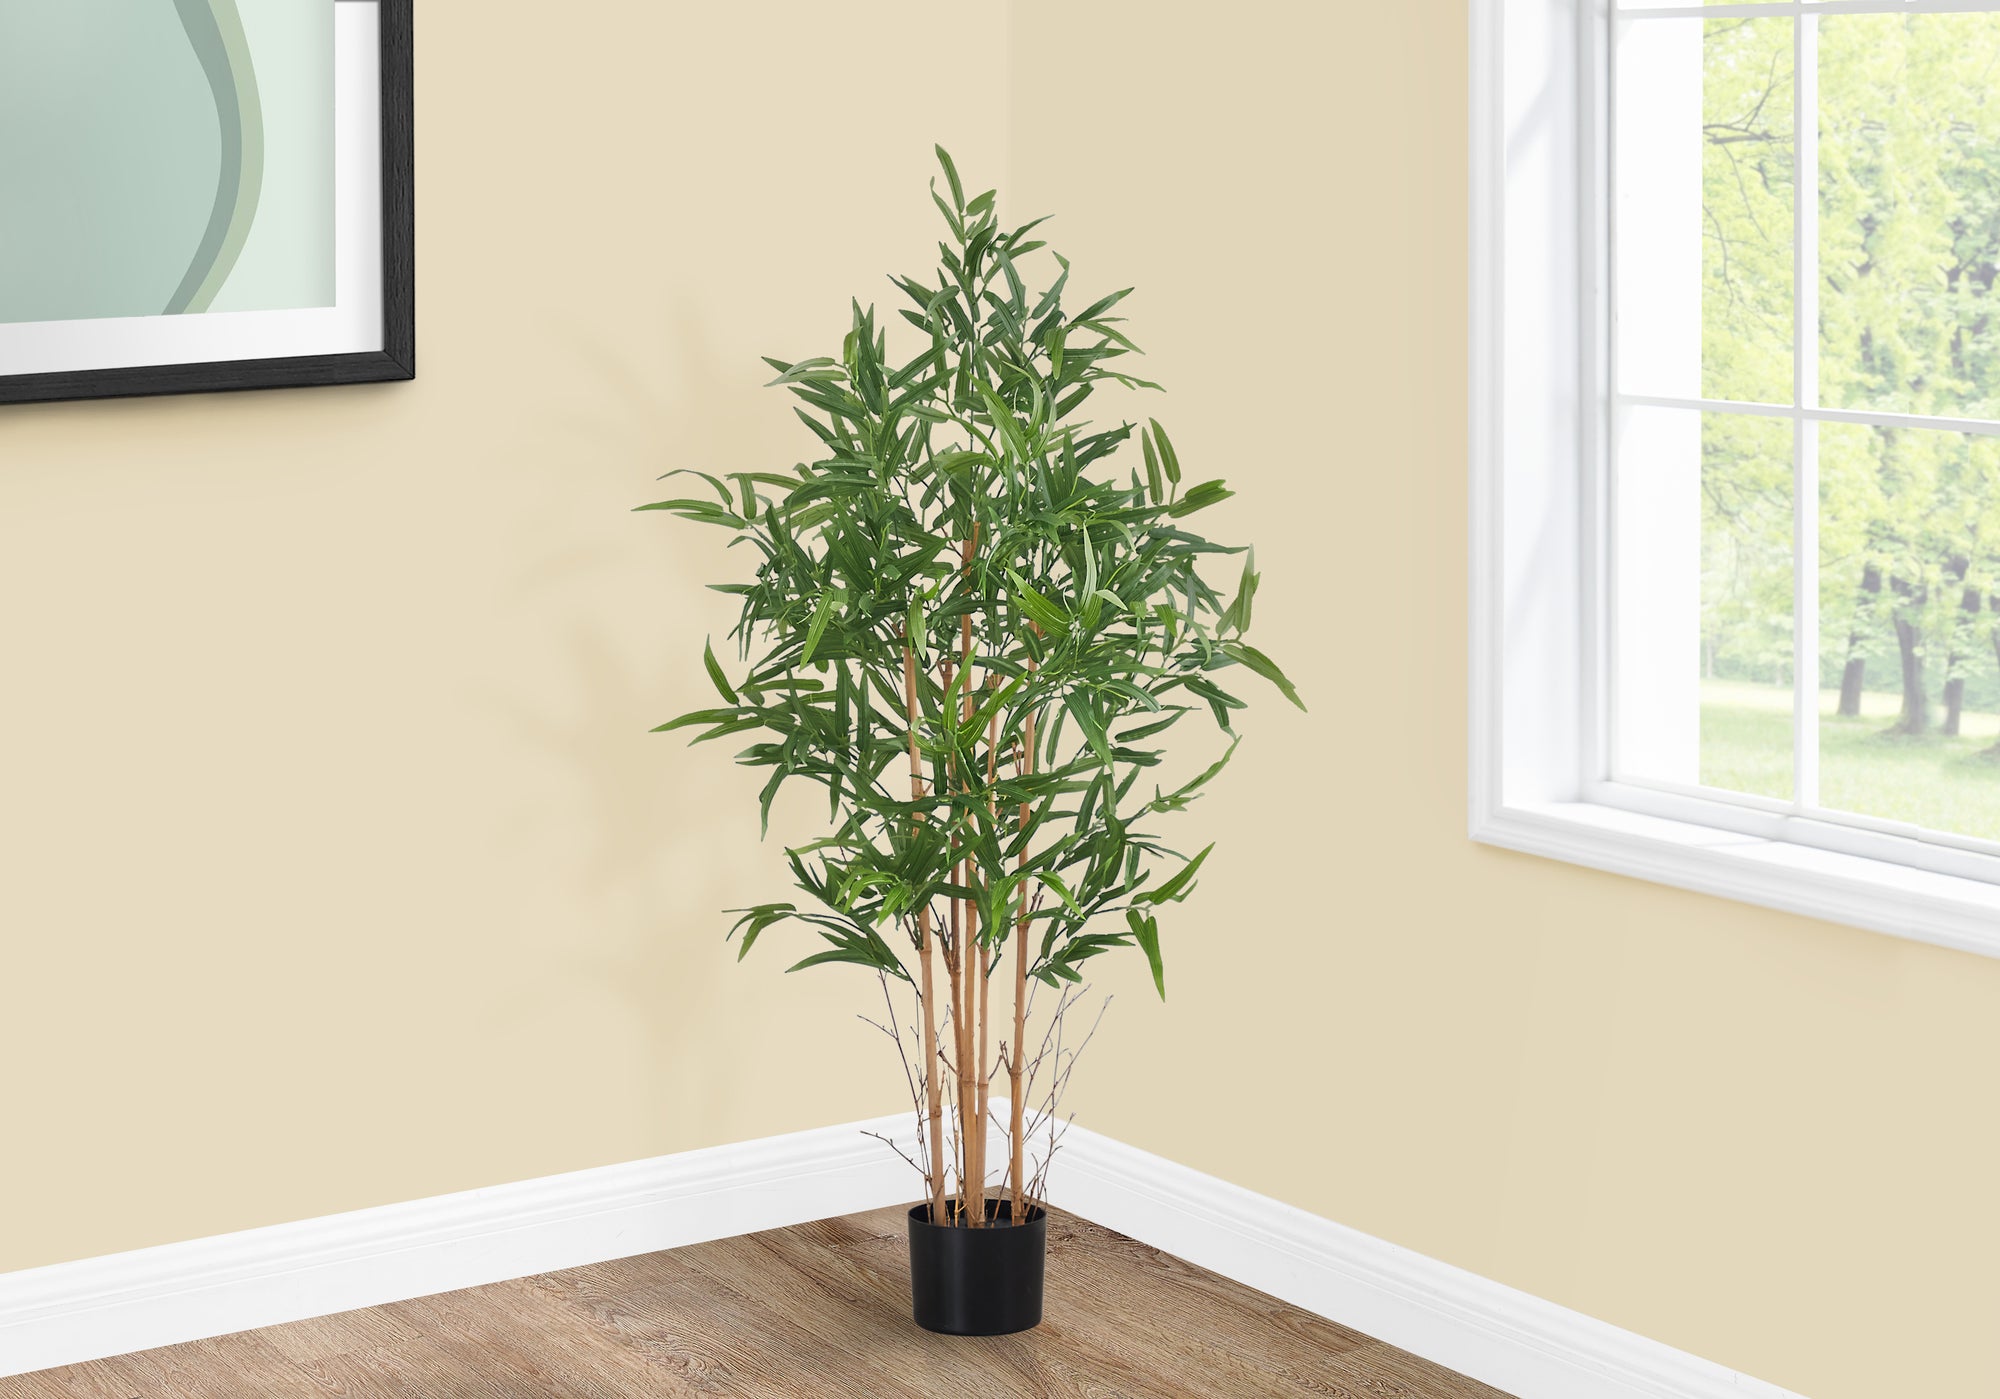 MN-569563    Artificial Plant, 50" Tall, Bamboo Tree, Indoor, Faux, Fake, Floor, Greenery, Potted, Decorative, Green Leaves, Black Pot